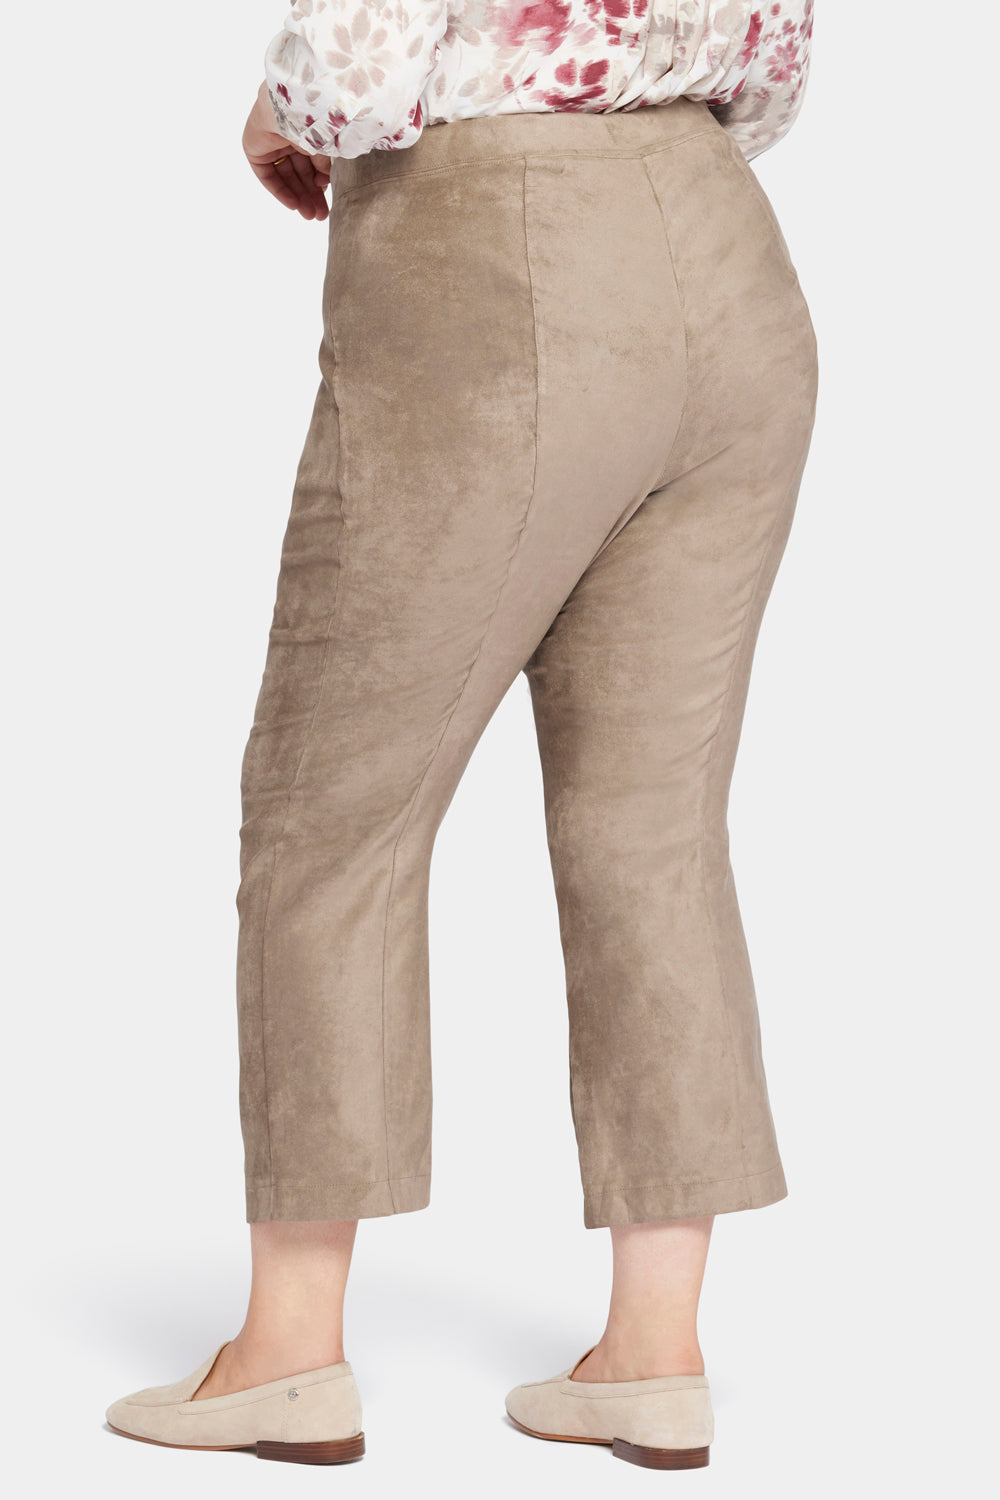 Clothing & Shoes - Bottoms - Leggings - NYDJ Stretch Faux Suede